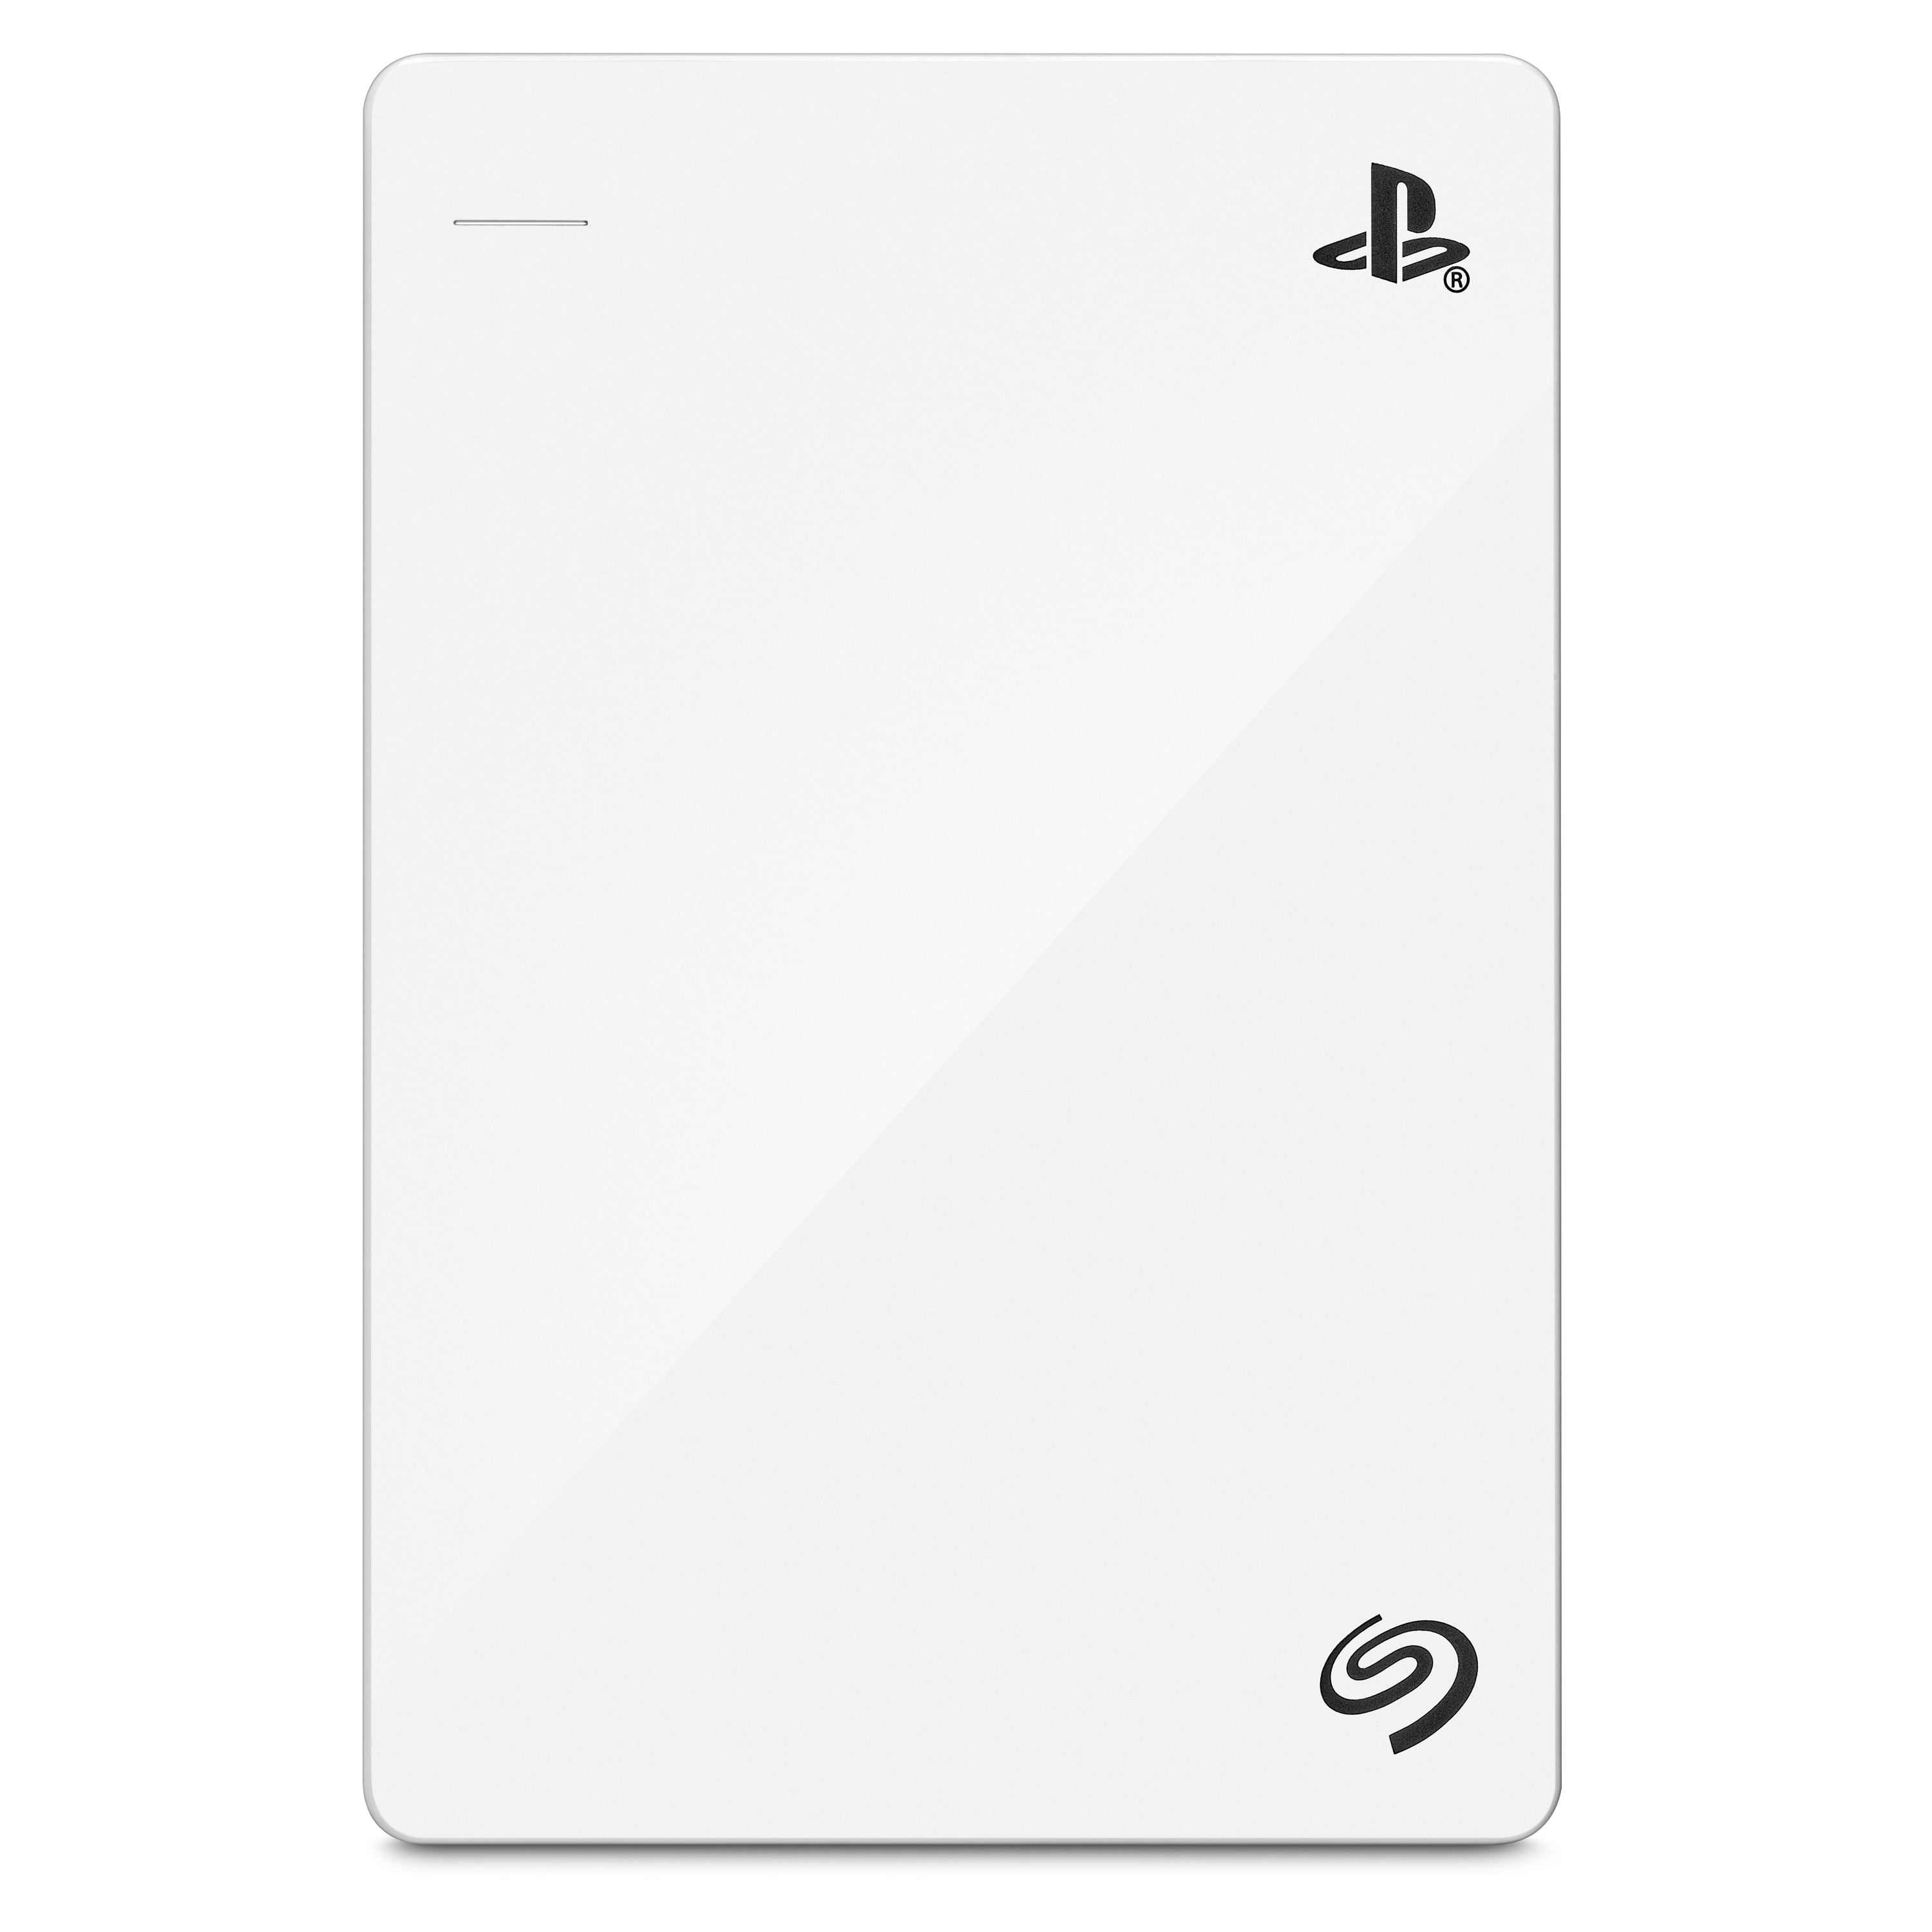 Baars probleem voorzetsel Seagate Game Drive for PlayStation Consoles 2TB External Portable Hard  Drive USB 3.0 Officially Licensed - White - Walmart.com